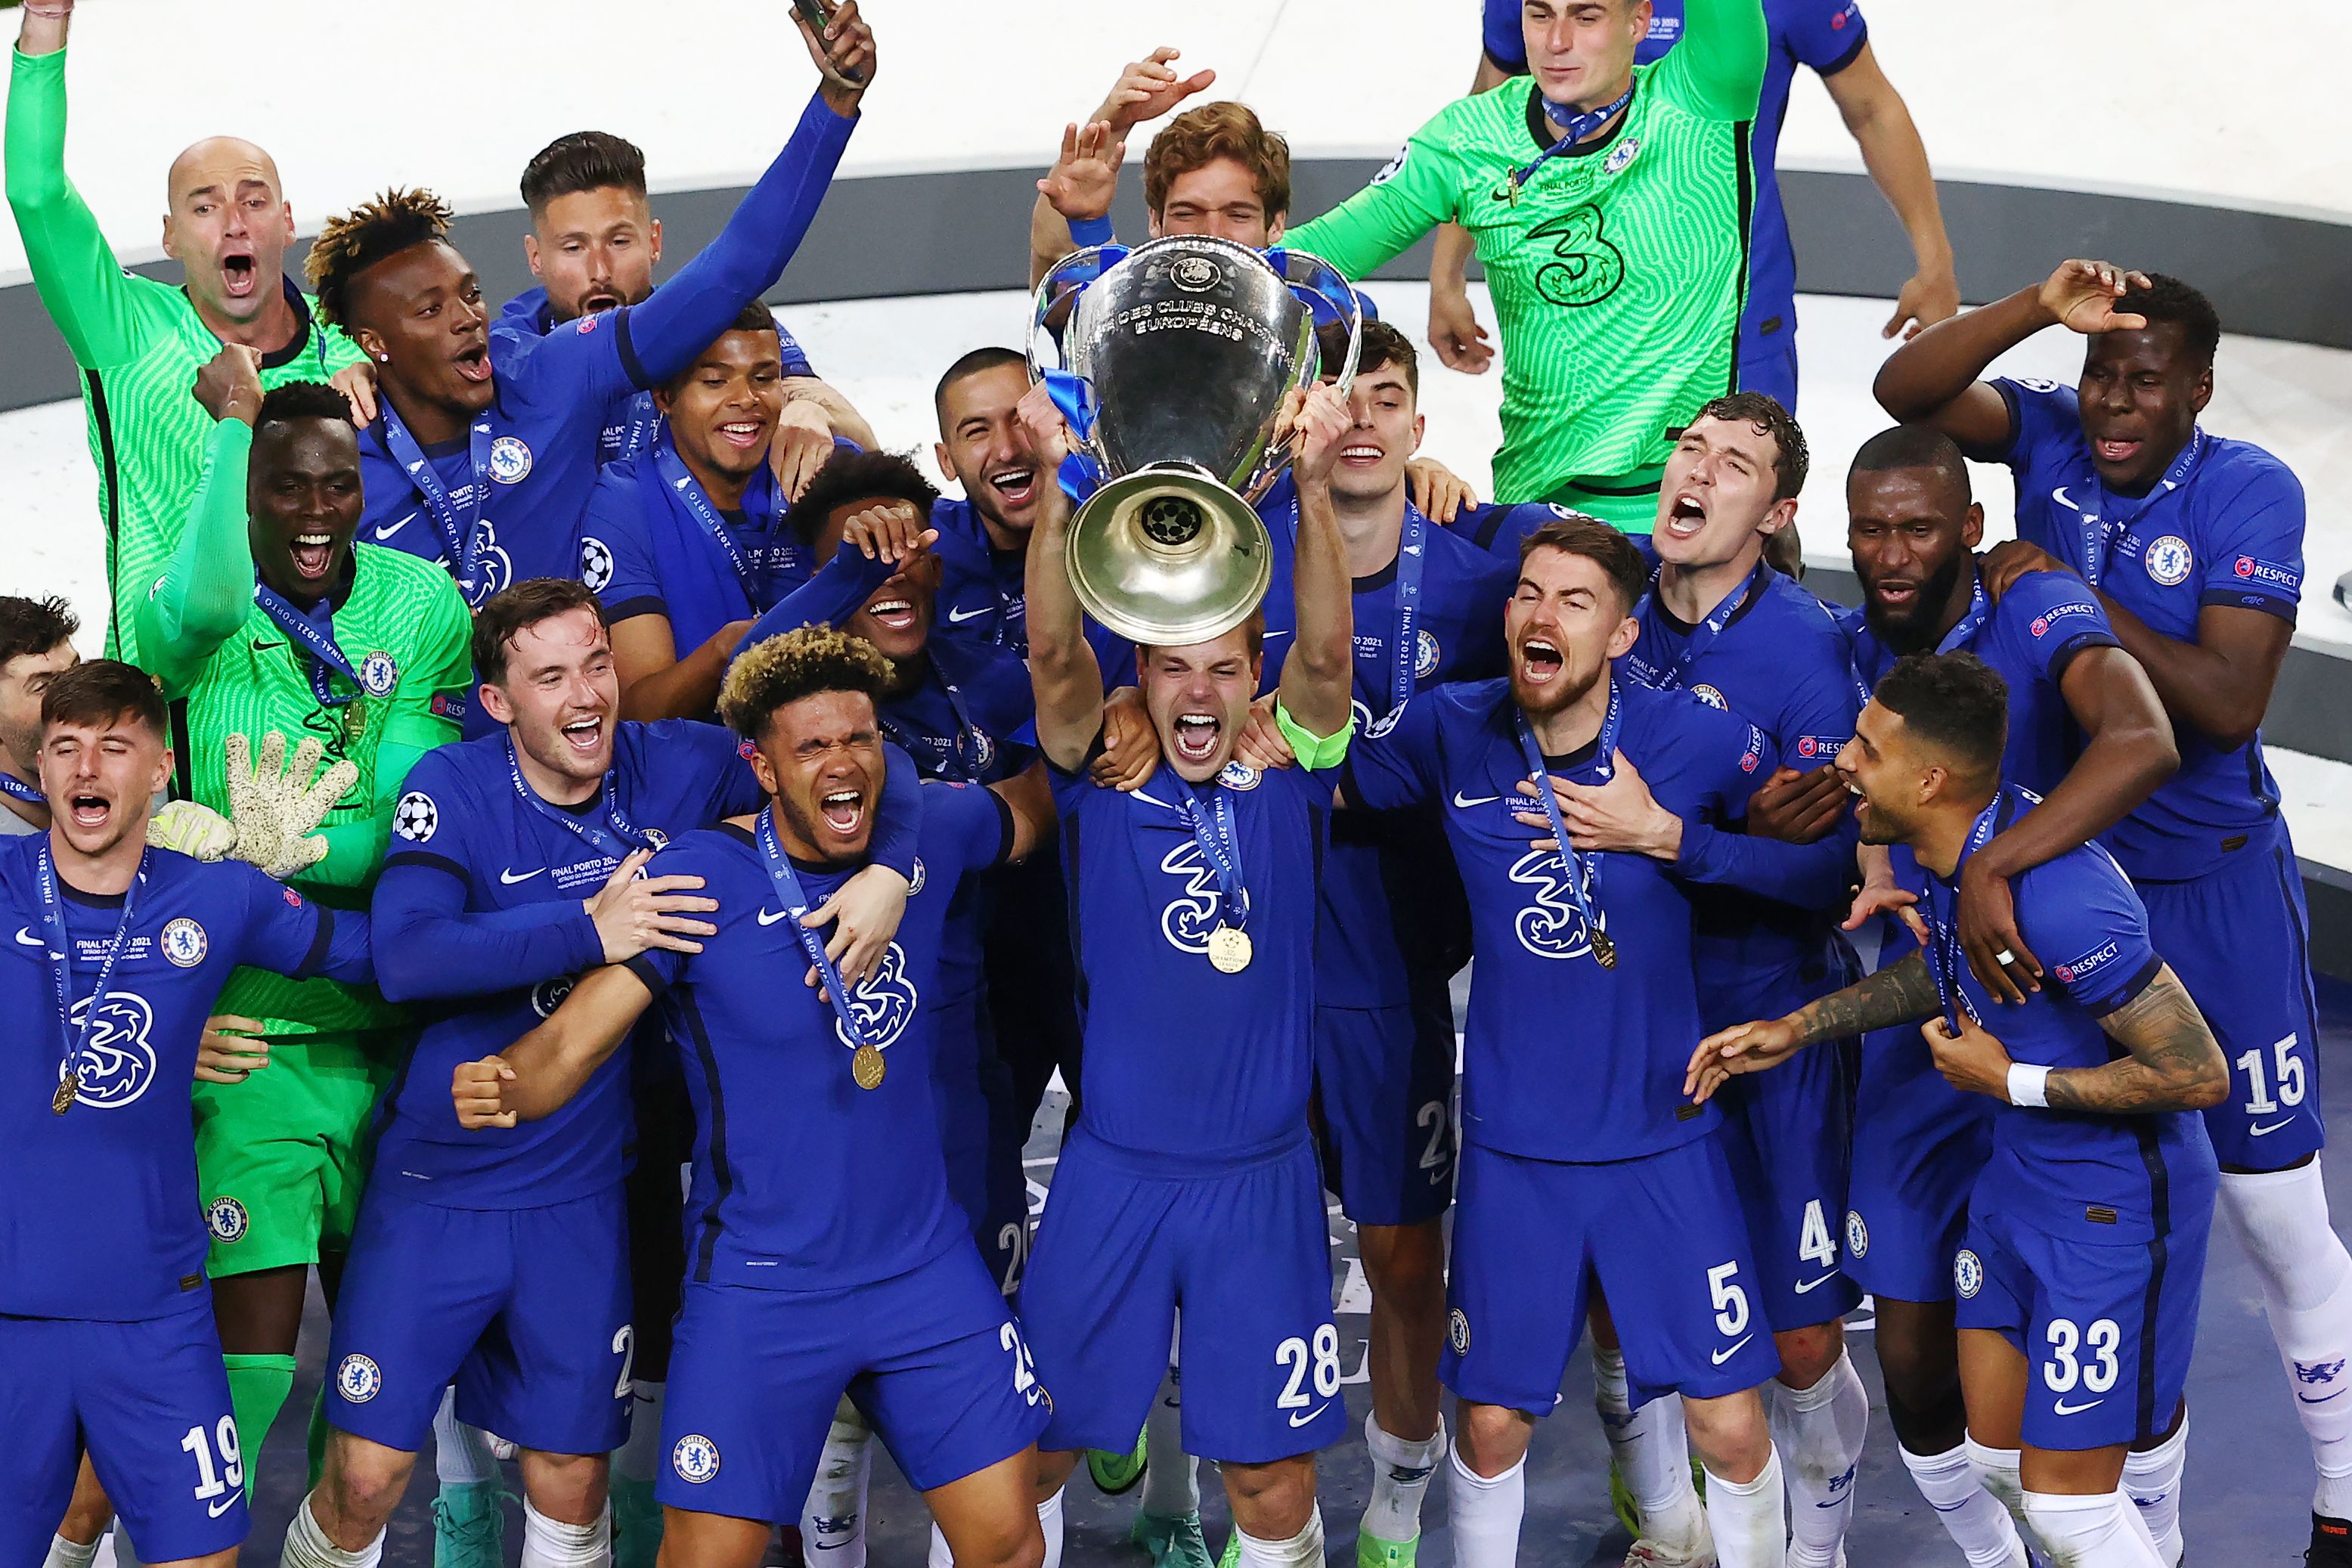 Champions League: 16 stellar photo from Chelsea's victory celebration